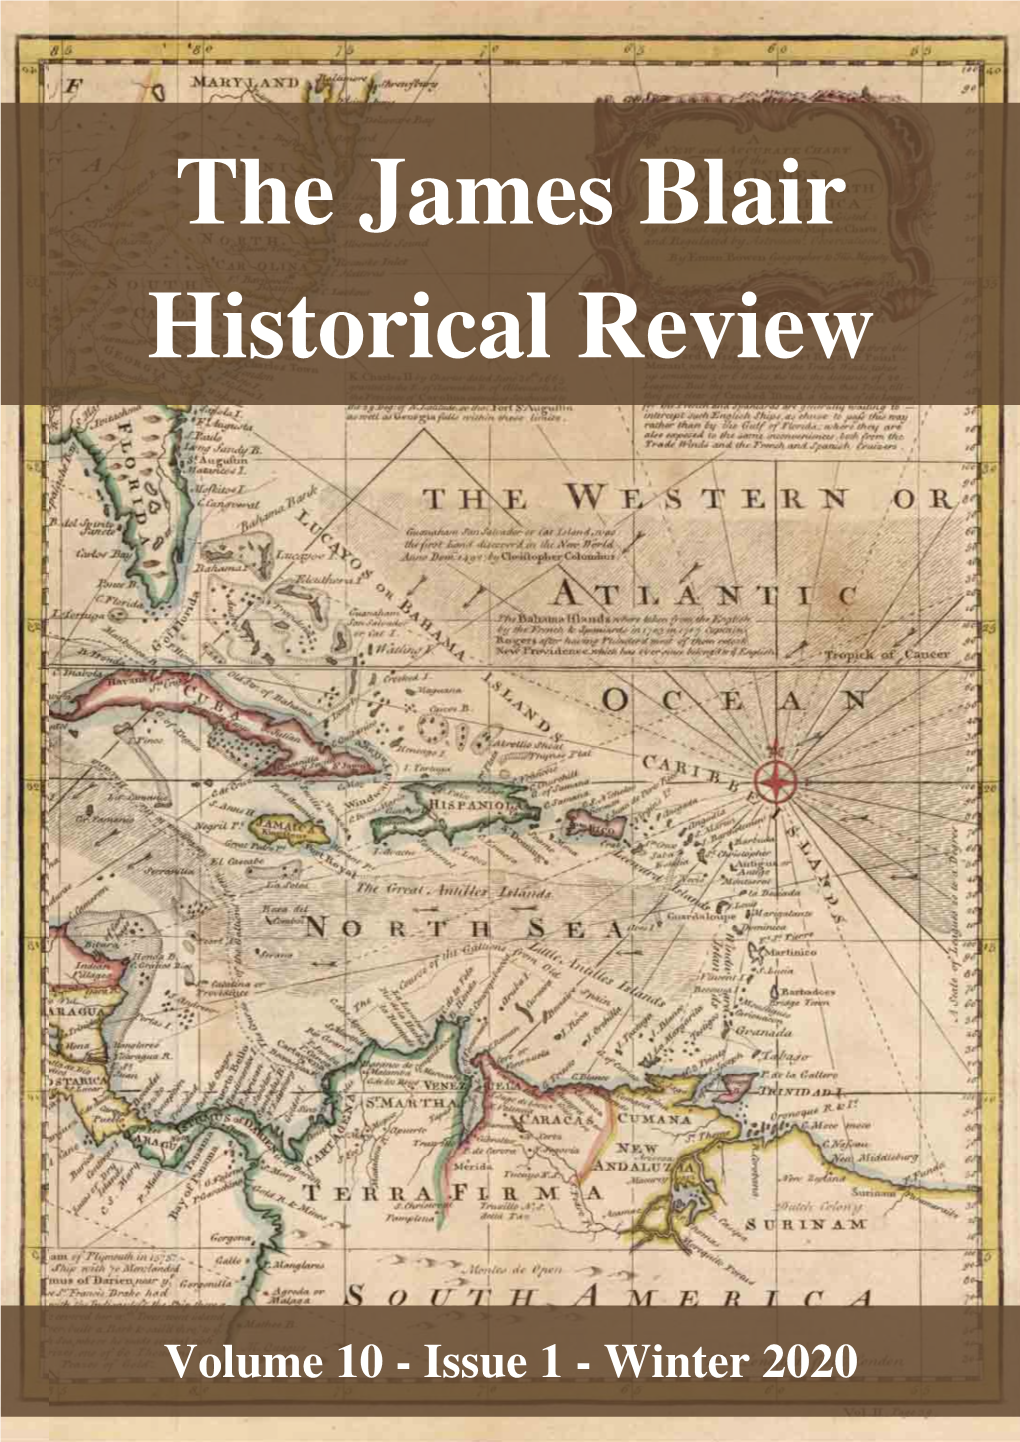 The James Blair Historical Review